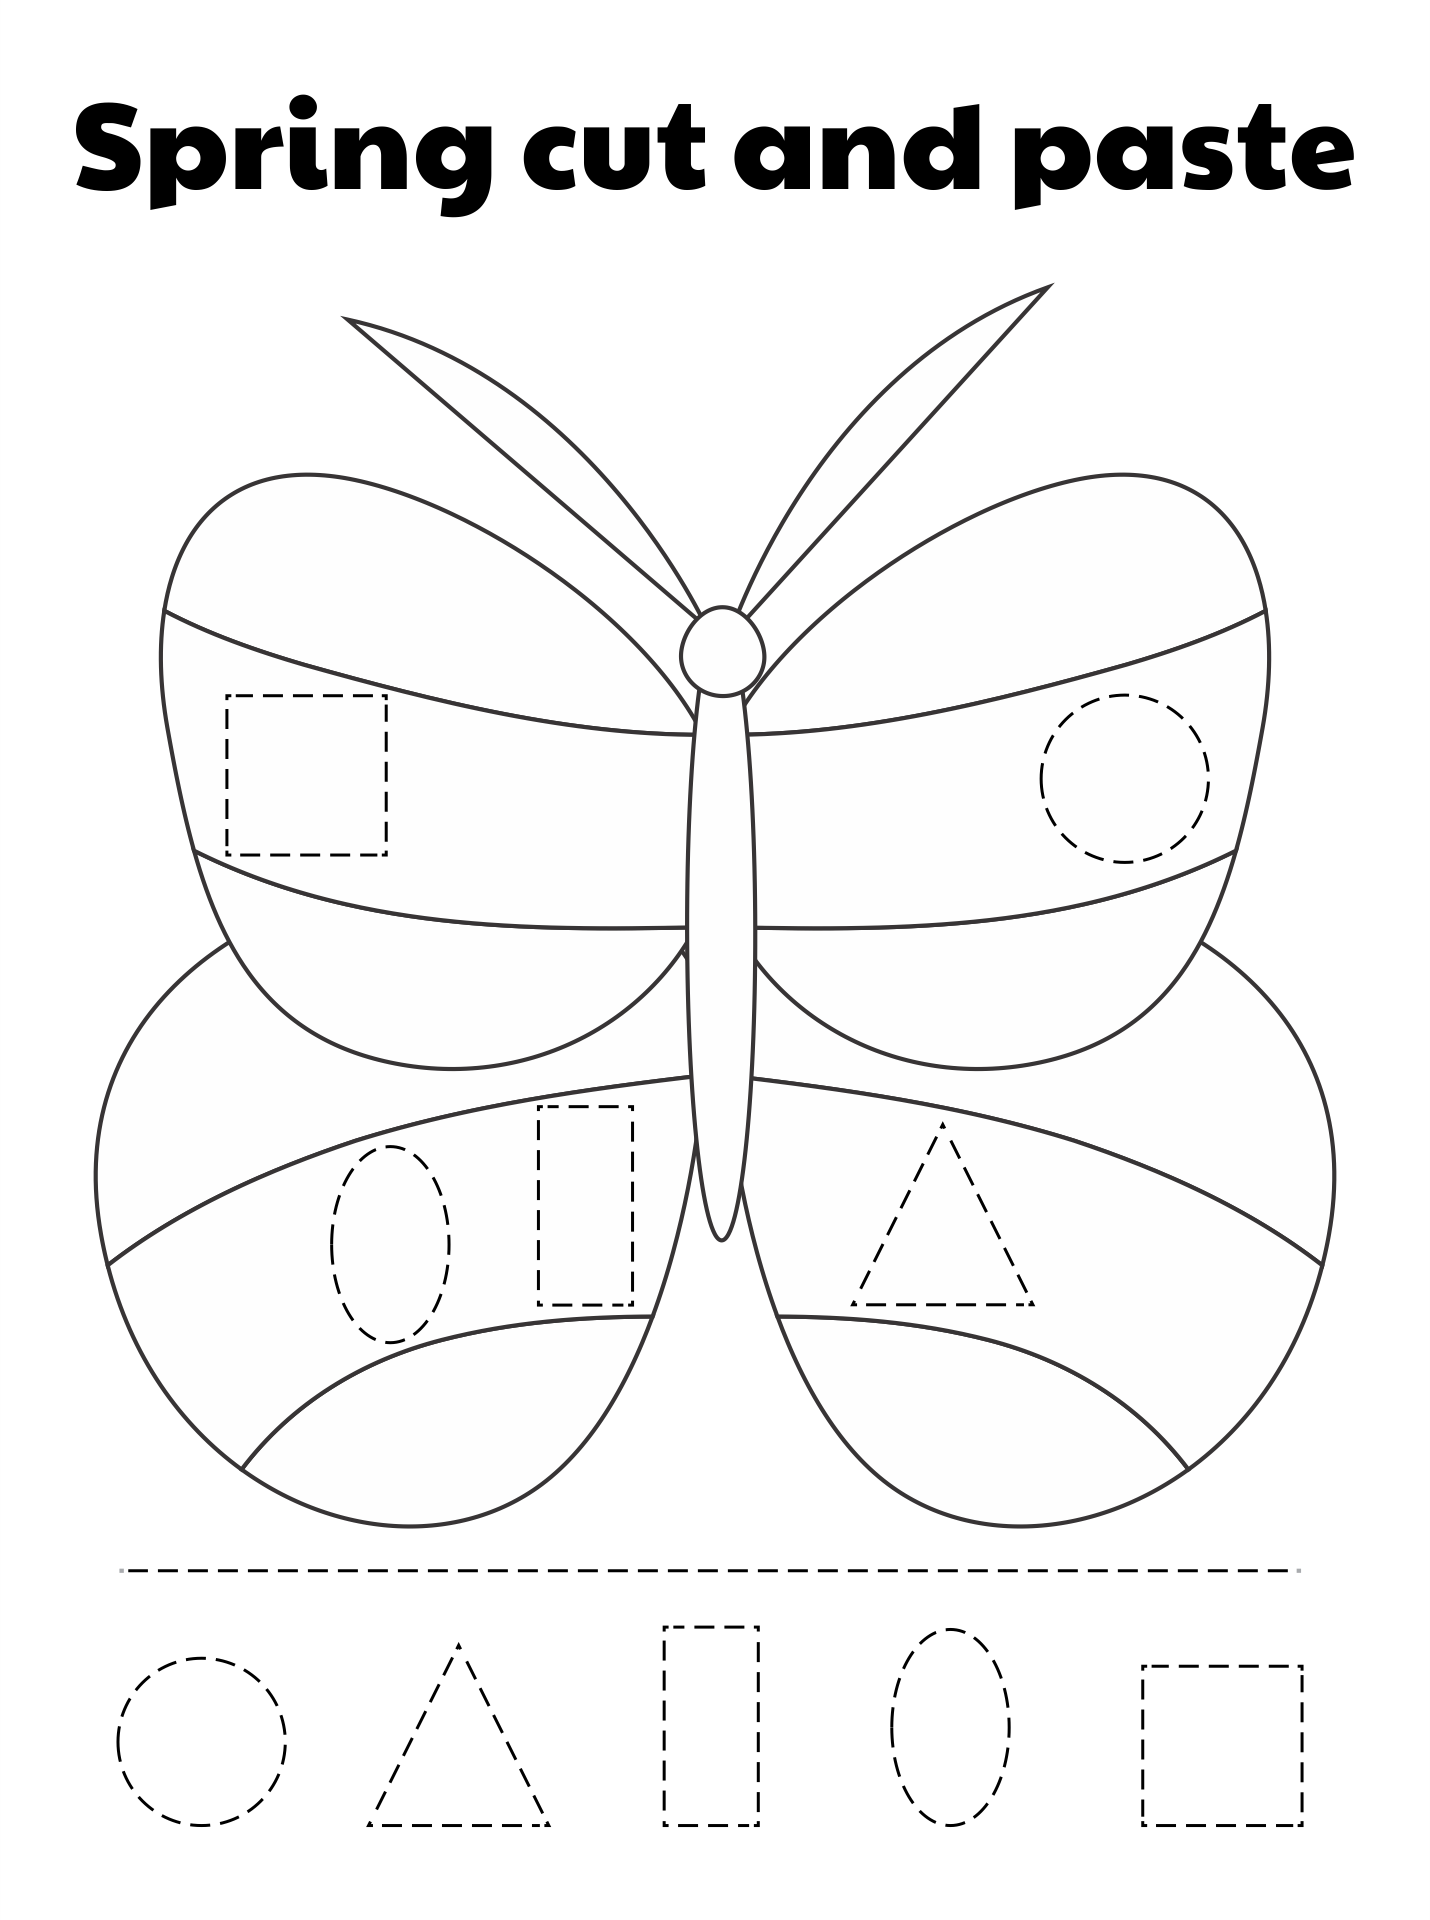 9 Best Images of Cut And Paste Printables - Spring Cut and Paste